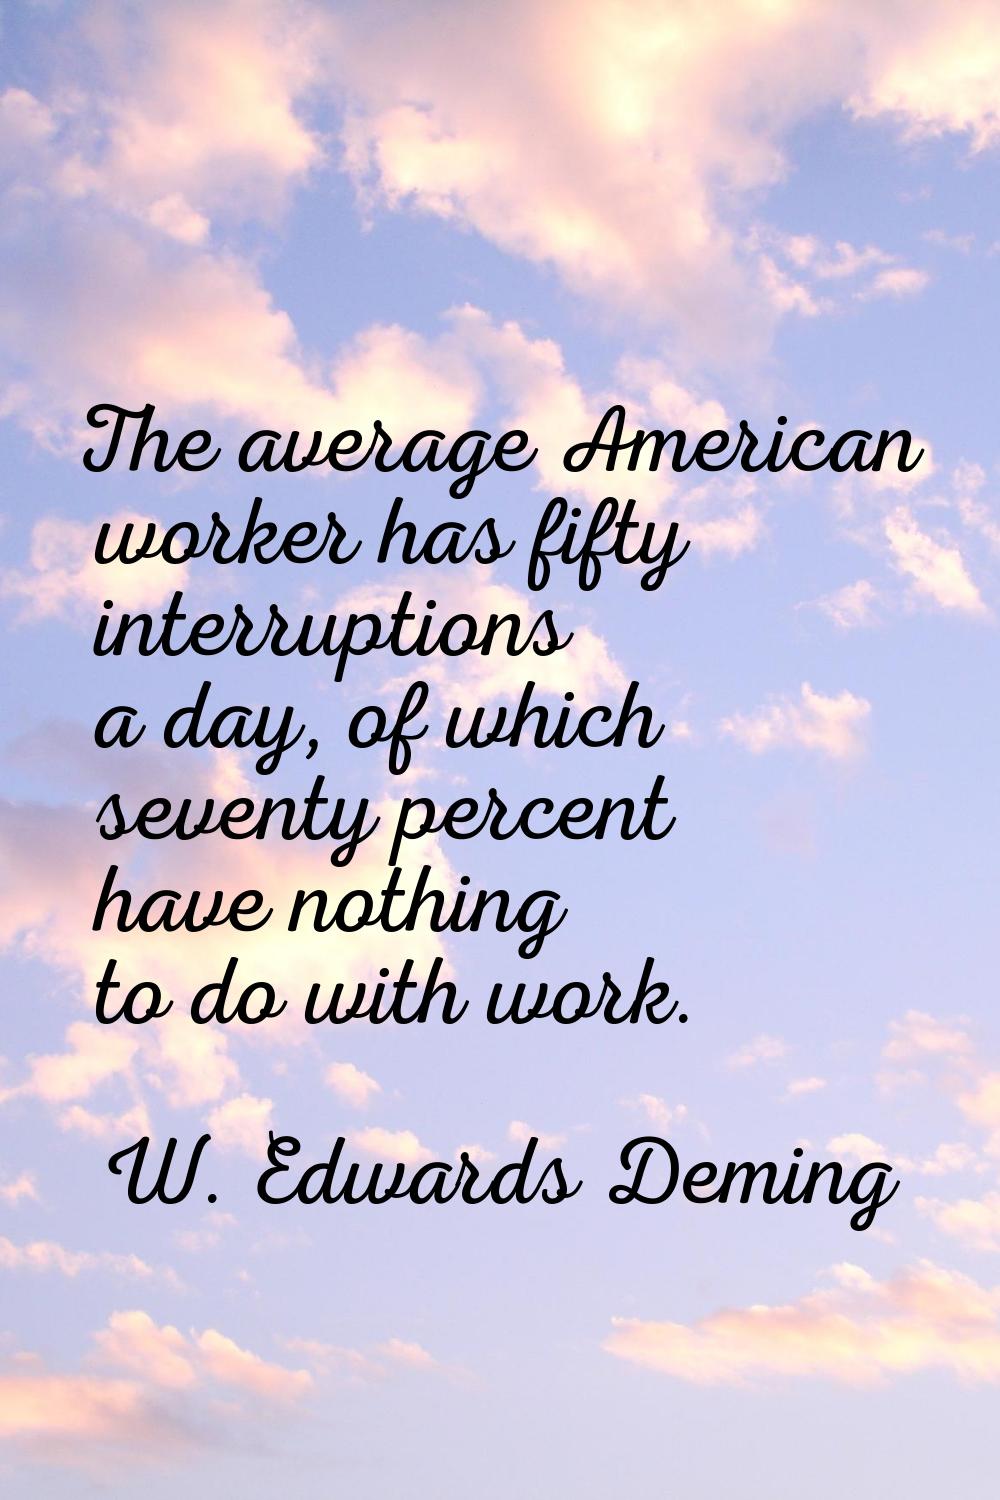 The average American worker has fifty interruptions a day, of which seventy percent have nothing to